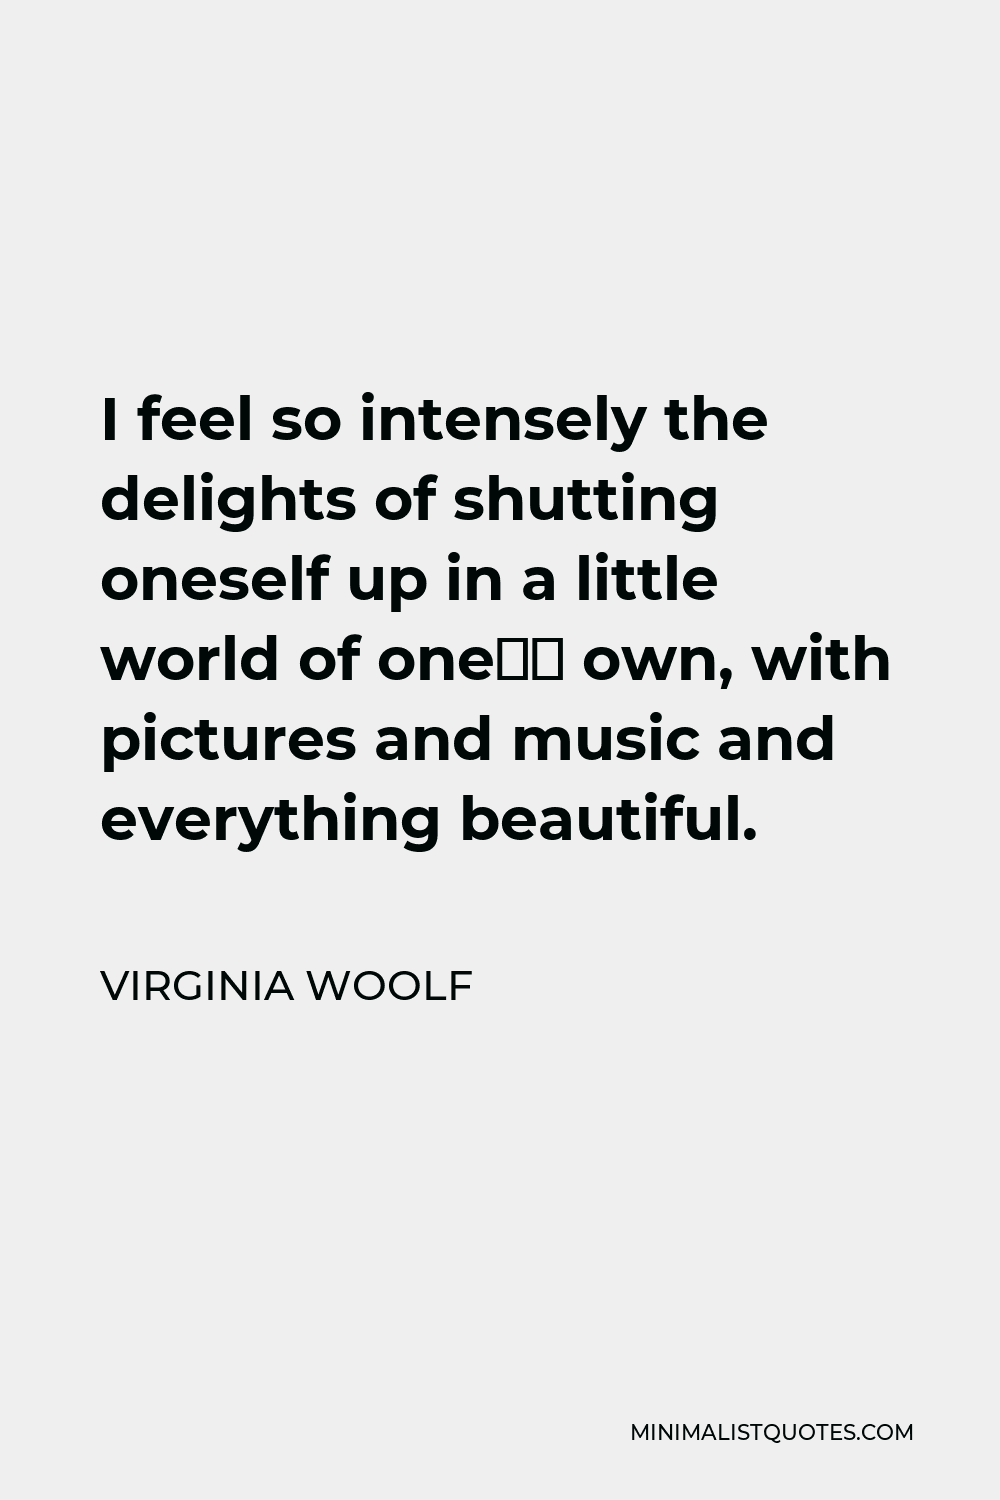 Virginia Woolf Quote - I feel so intensely the delights of shutting oneself up in a little world of one’s own, with pictures and music and everything beautiful.